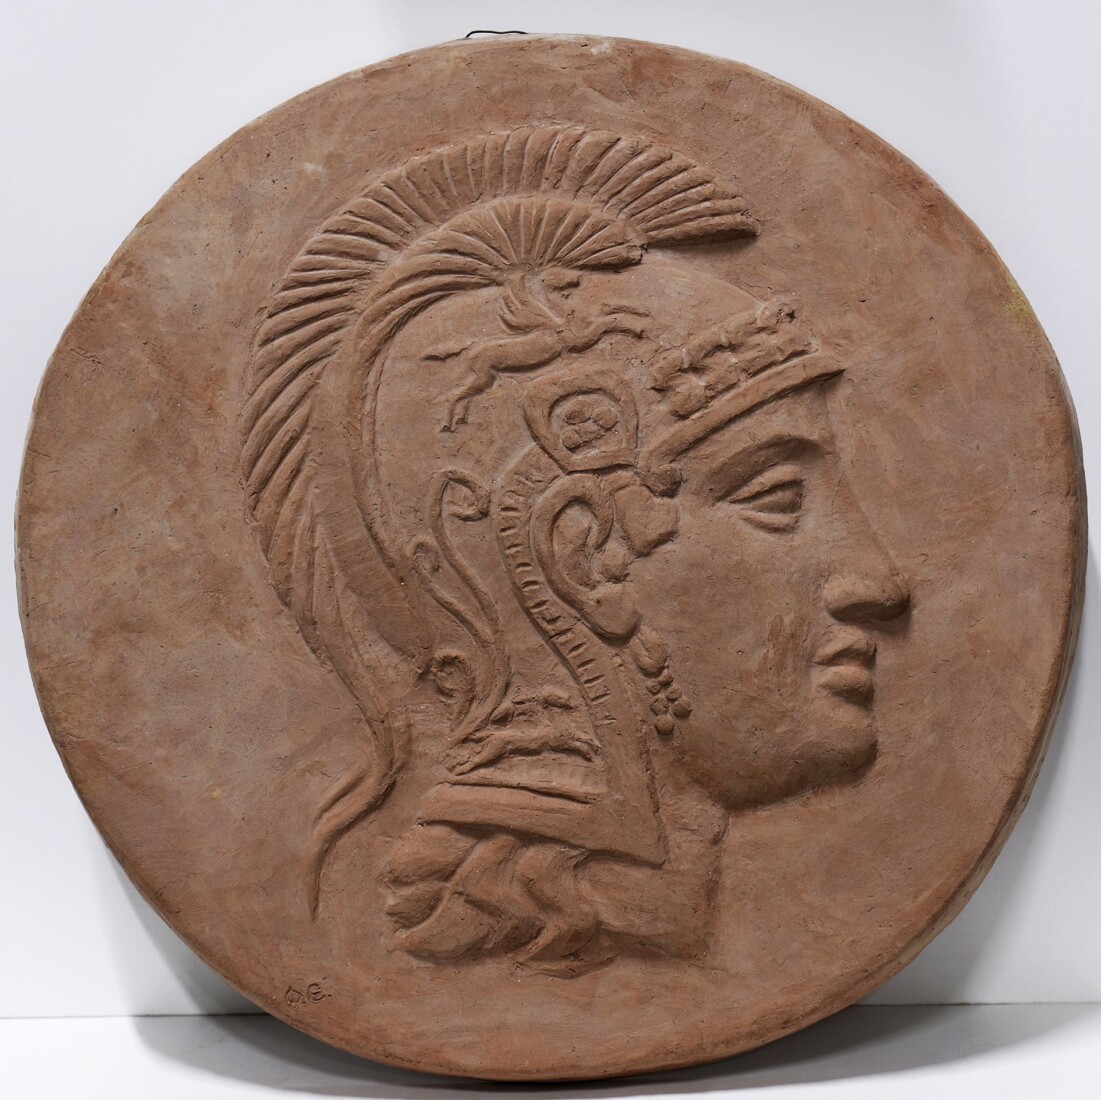 Athena (medal for the Municipality of Athens)